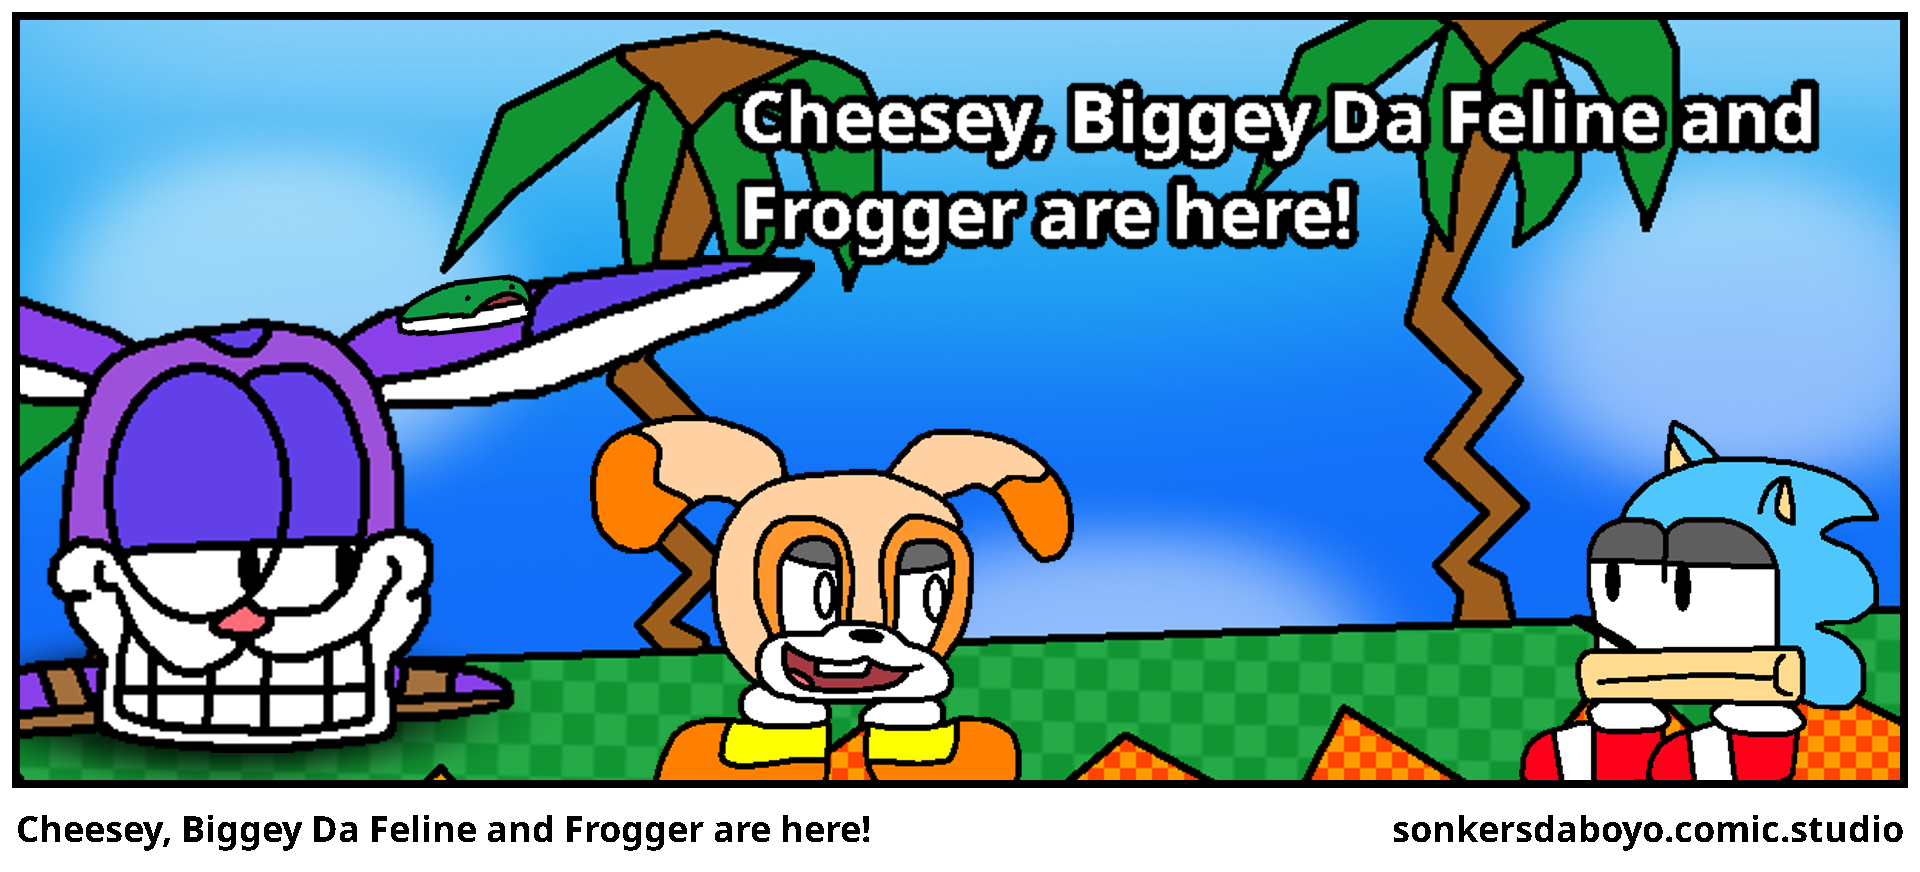 Cheesey, Biggey Da Feline and Frogger are here!